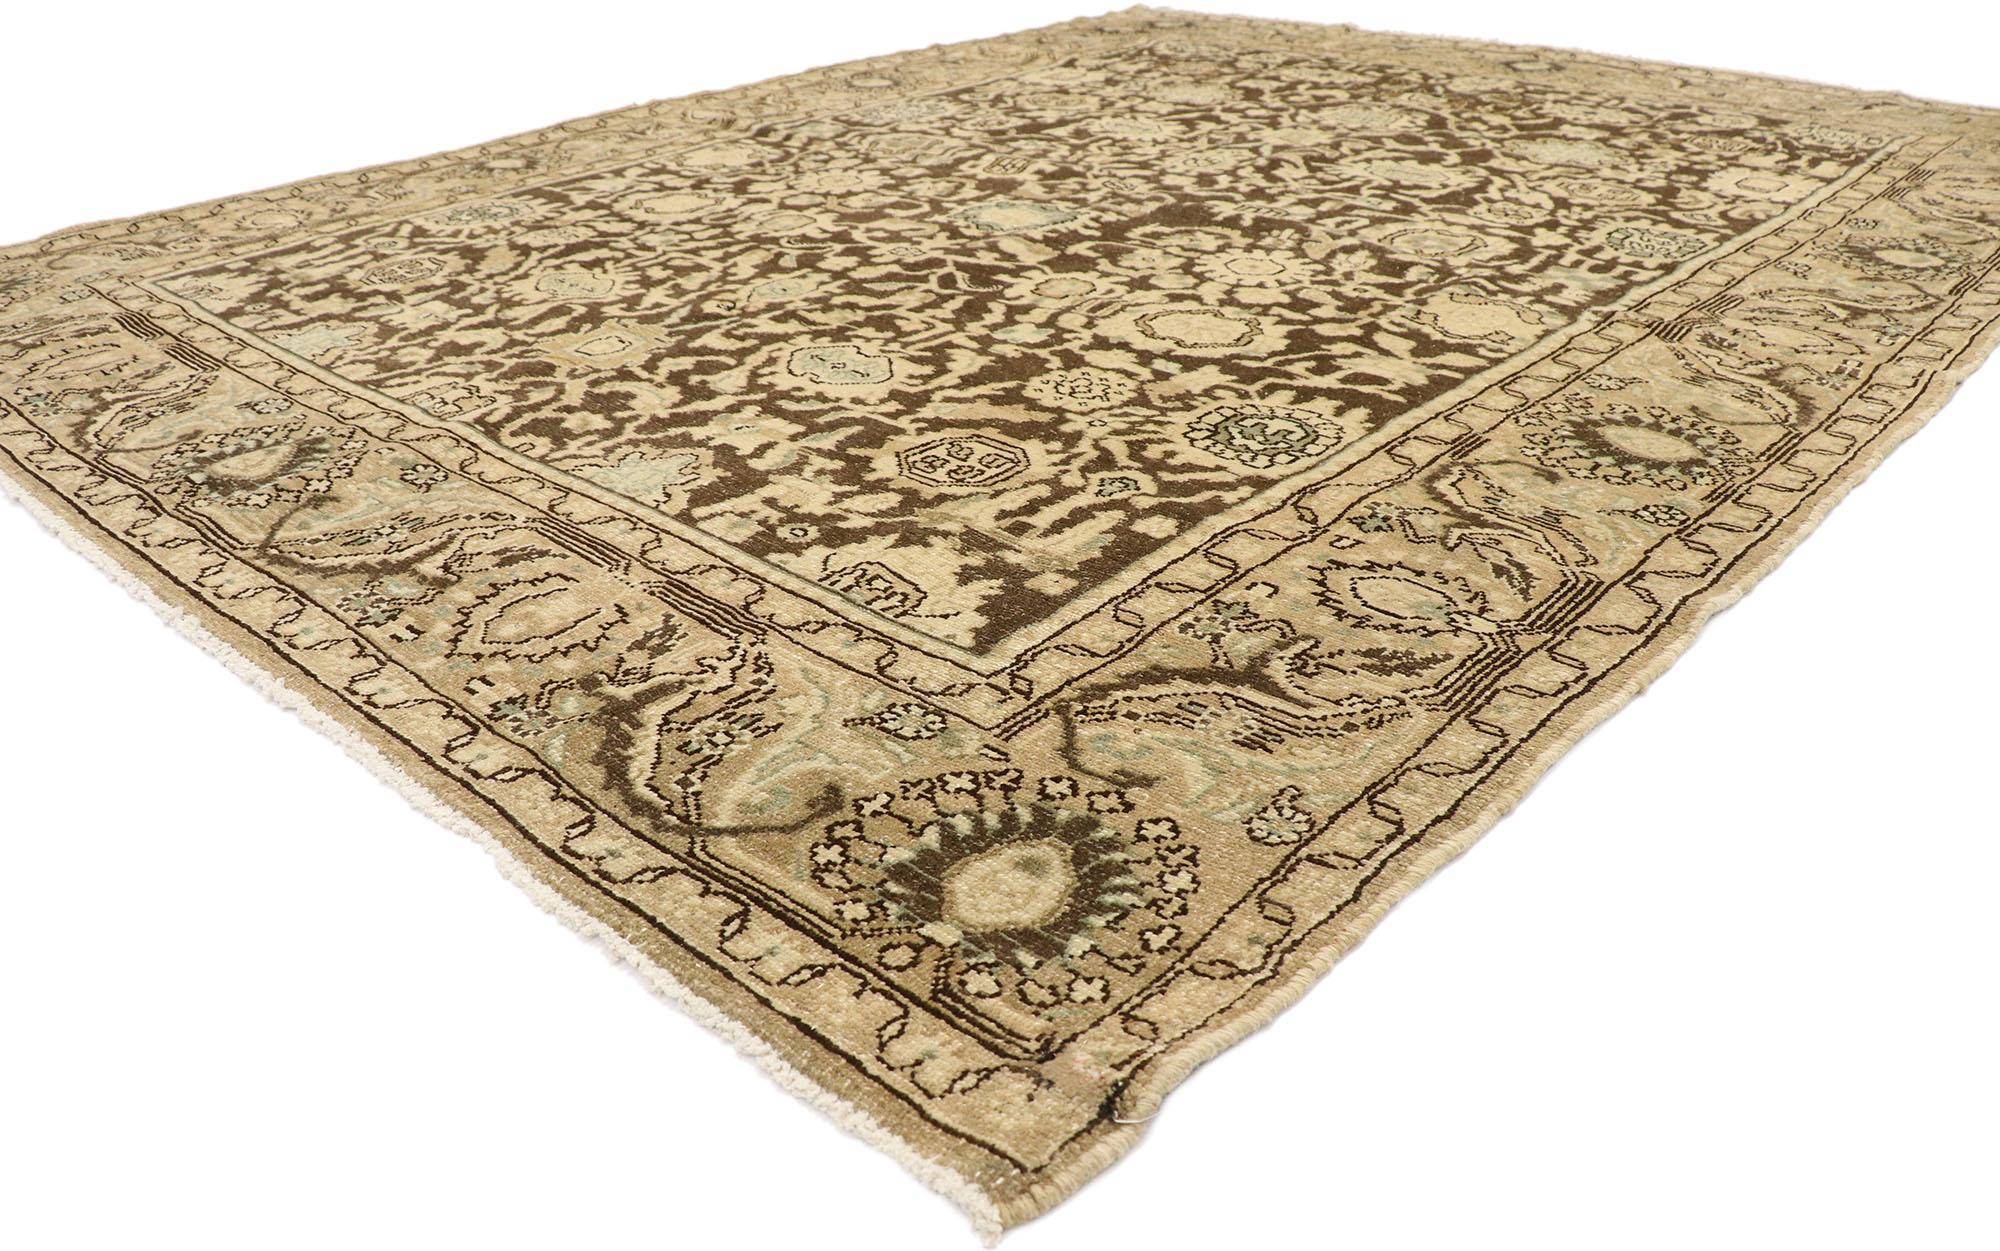 60944 Distressed Antique Persian Malayer Rug, 07'03 x 09'10.
Prepare yourself for a captivating journey, as you are whisked away by the comforting embrace of this meticulously hand-knotted antique Persian Malayer rug. Immerse yourself in the